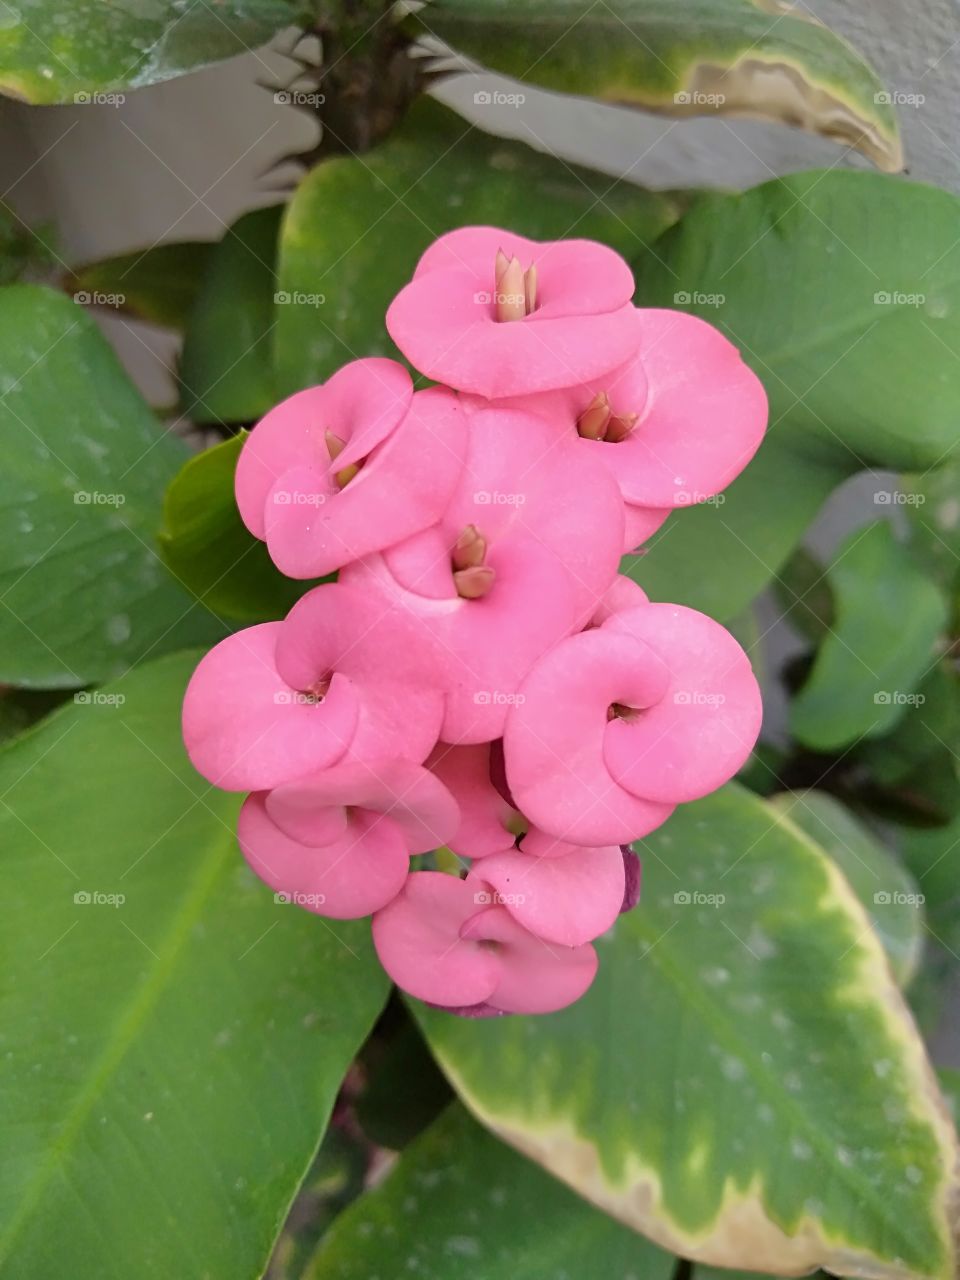 Lovely and pinky flower